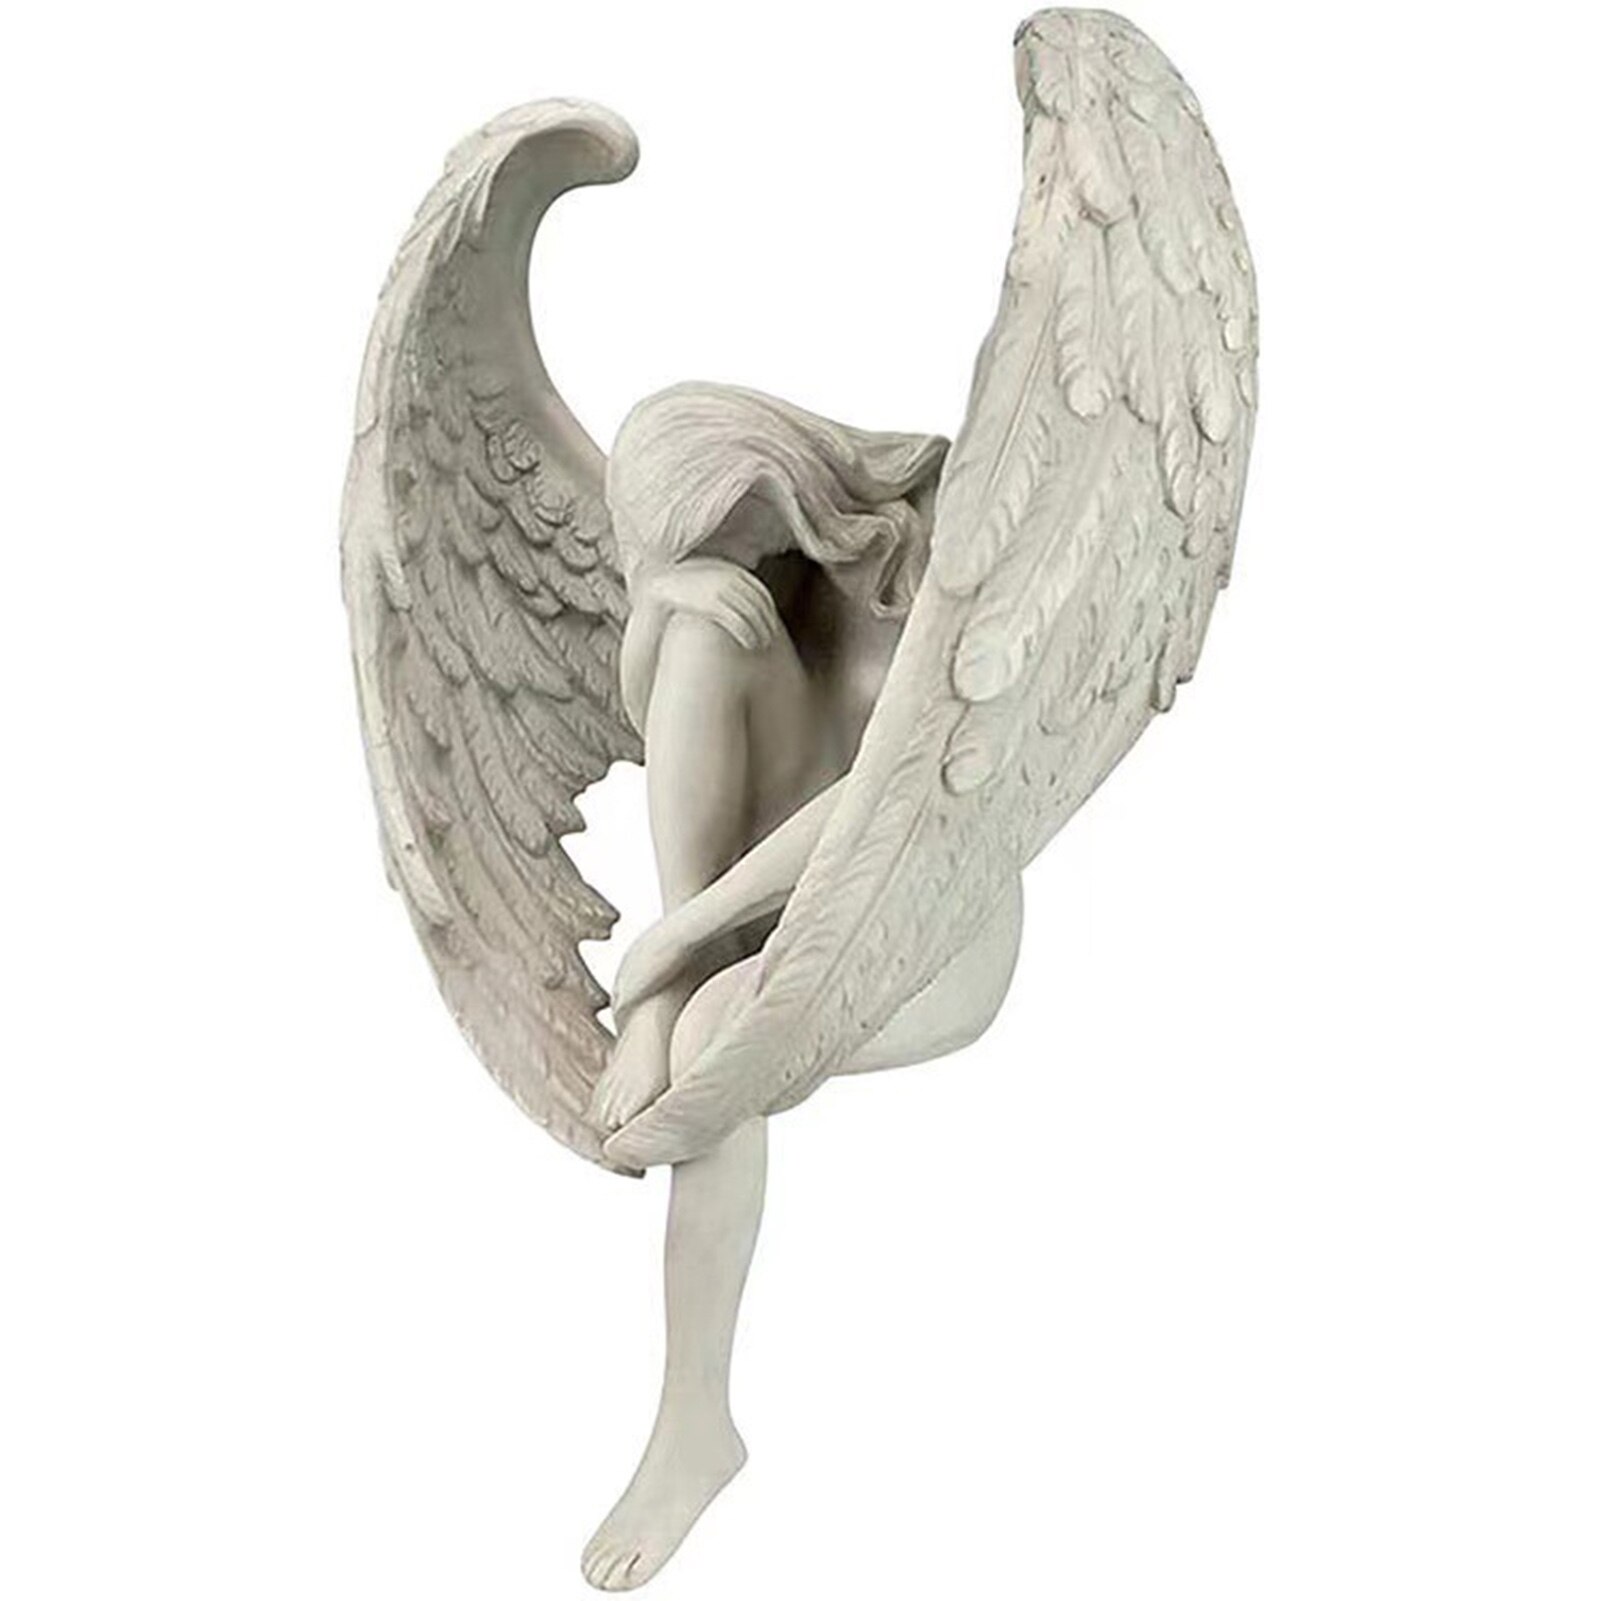 The Anguished Angel Long-Winged Sitting Statue Resin Sorrowful Figure Memorial Cemetery Statues Crying Garden Outdoor Decoration: Default Title